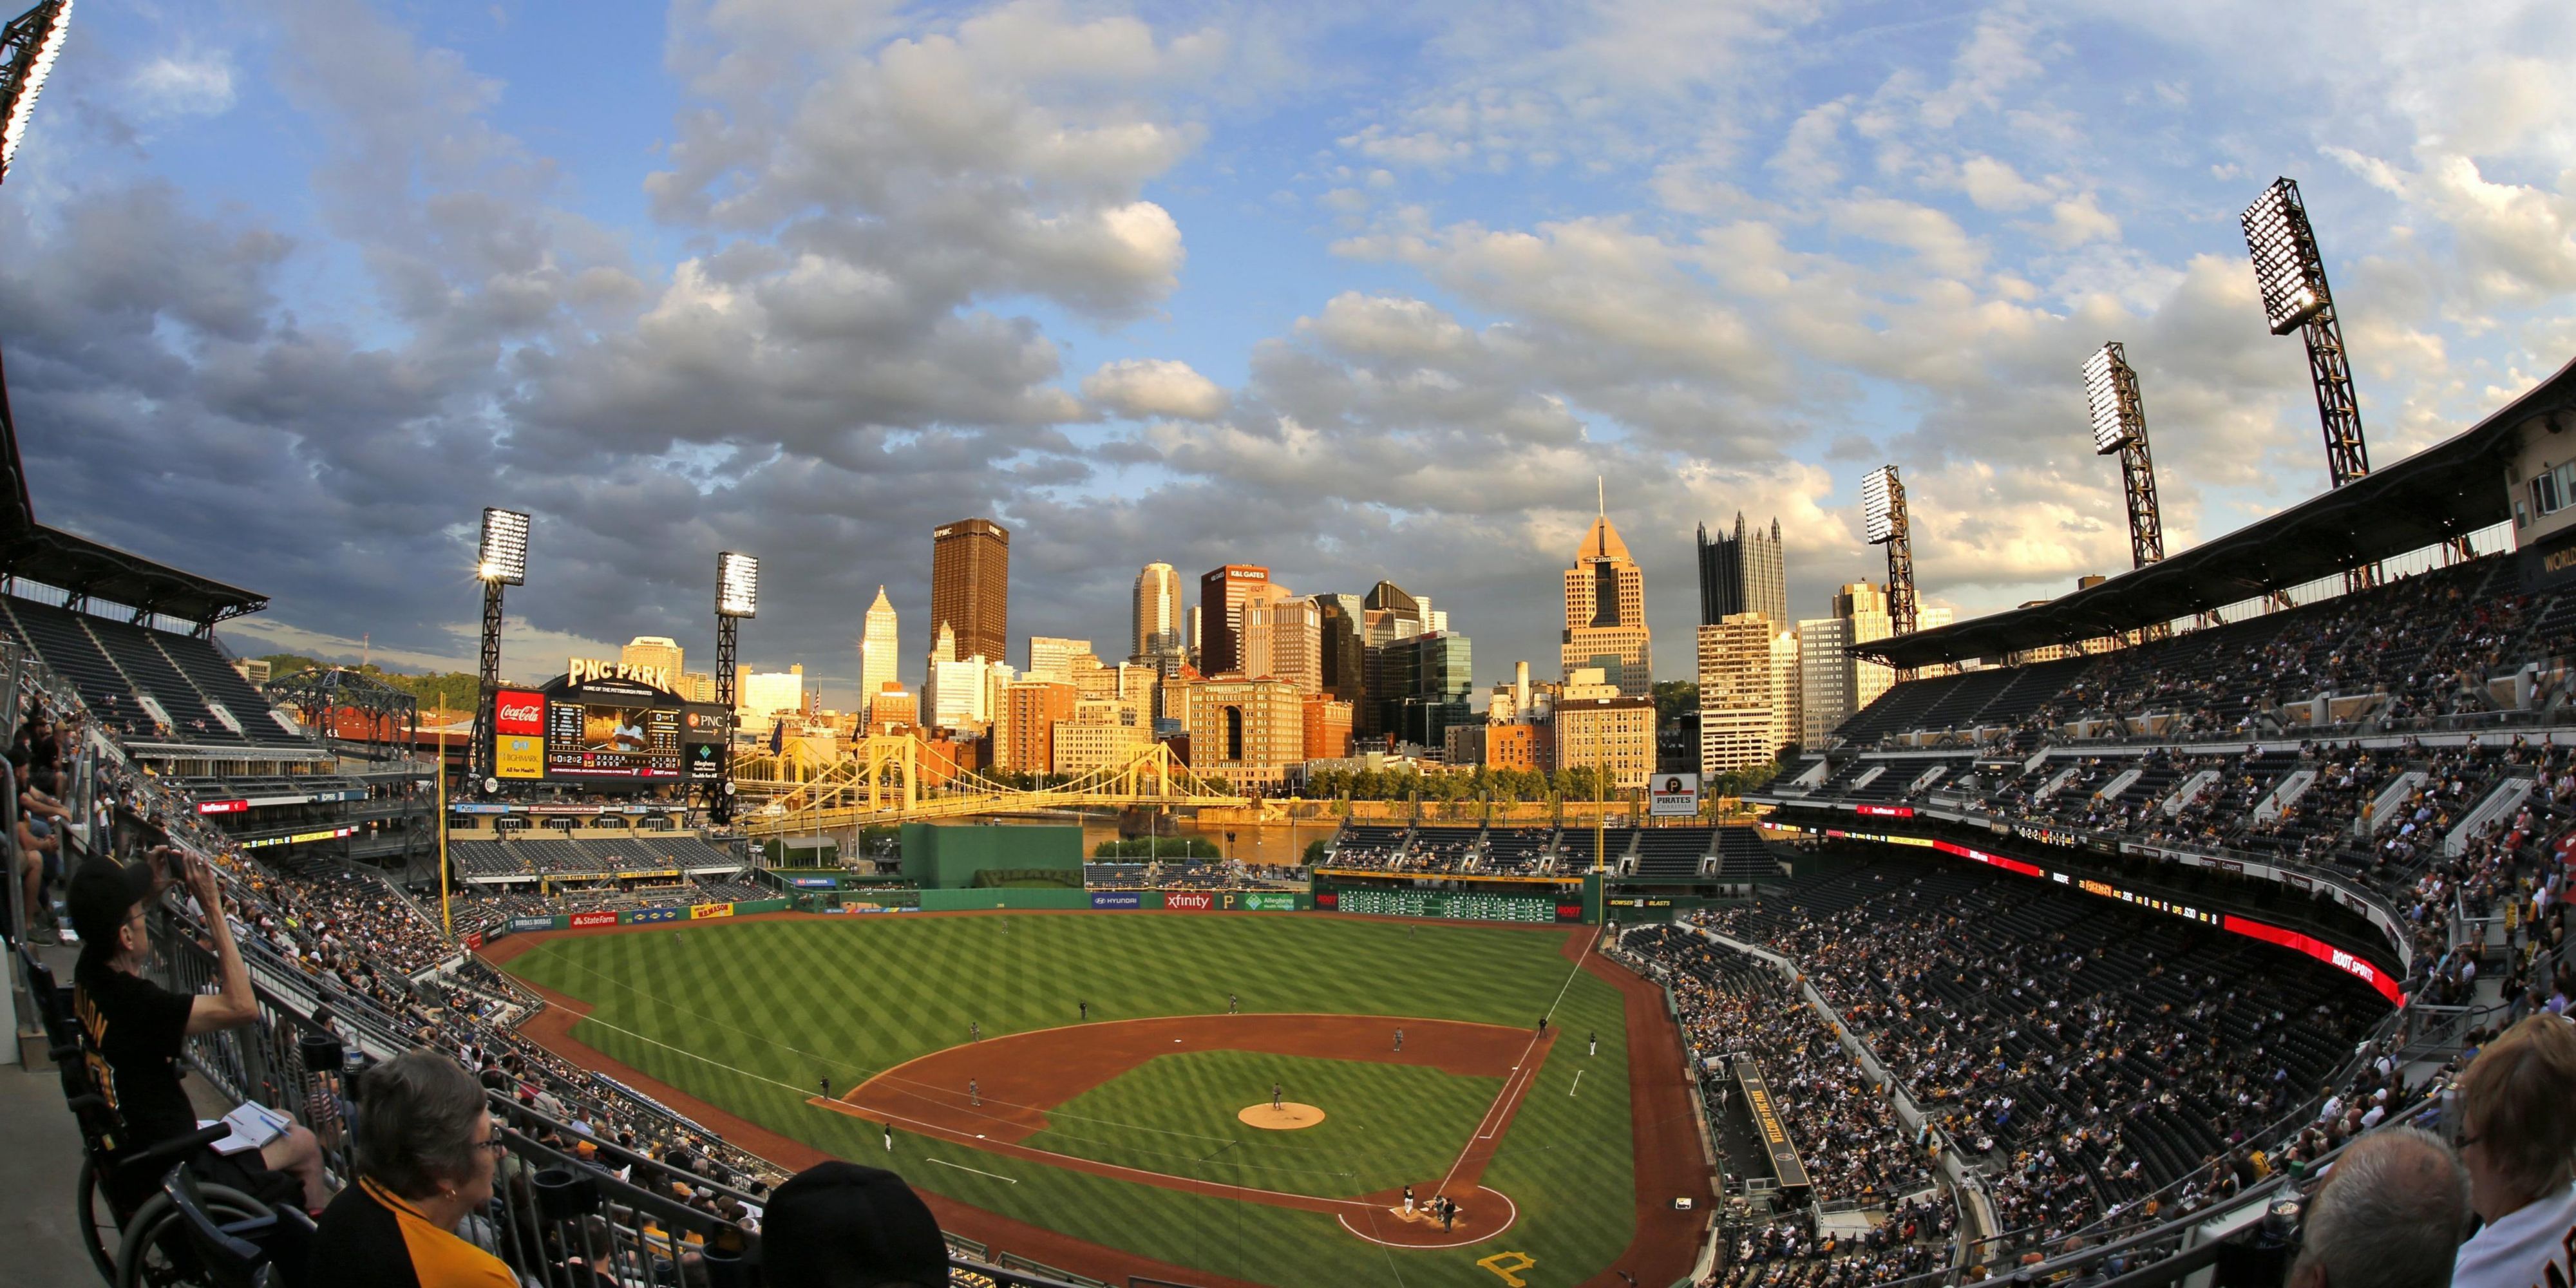 The beautiful PNC Park is just steps away from our front door. Take in a Pittsburgh Pirates game or the occasional concert while staying with us!